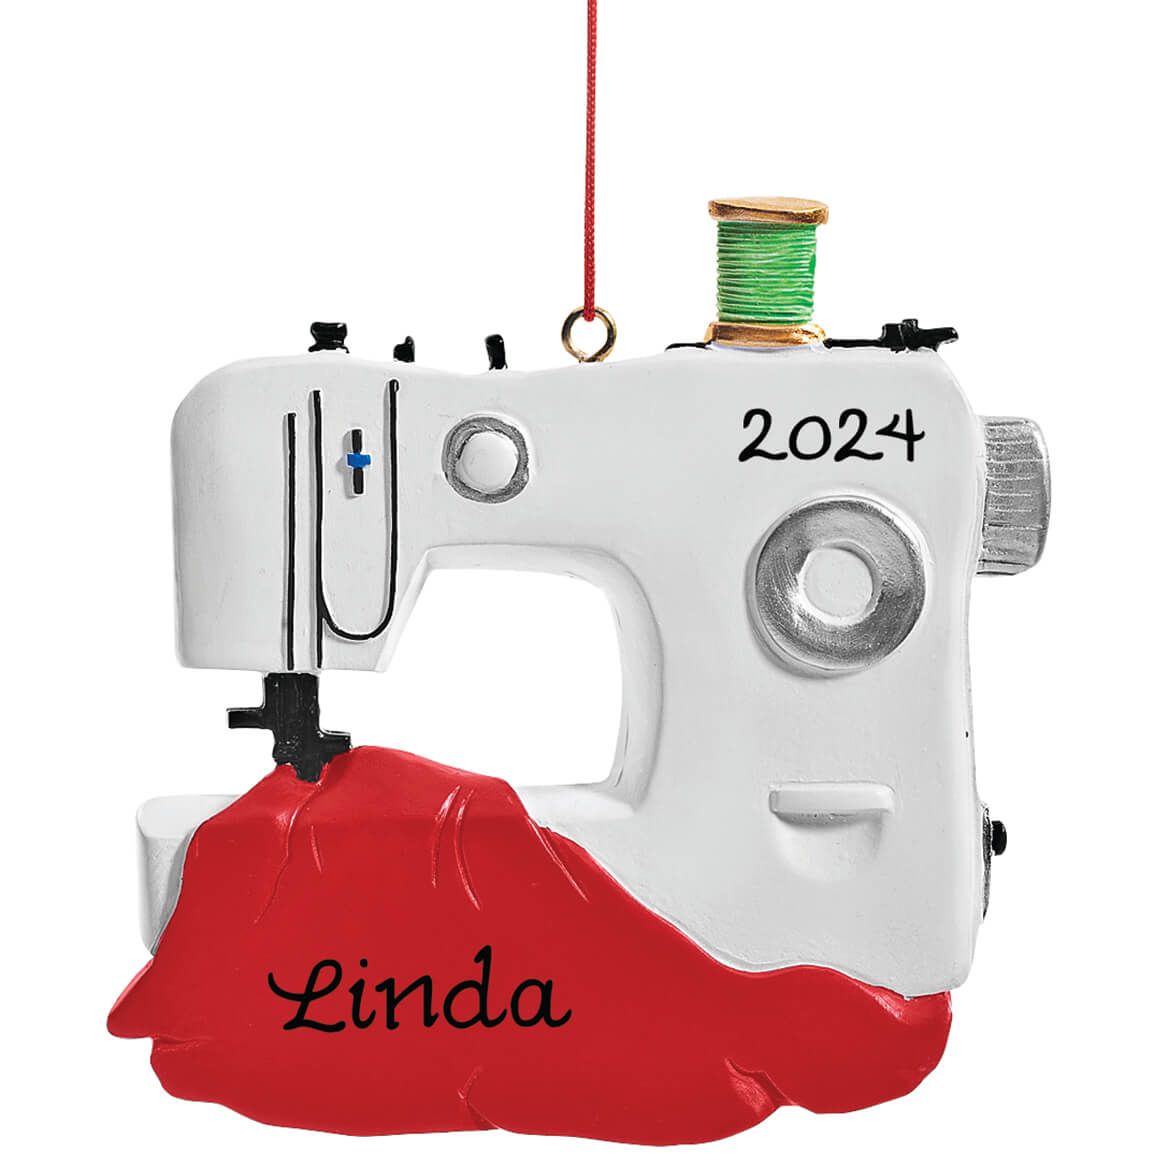 Personalized Sewing Machine Ornament + '-' + 352925